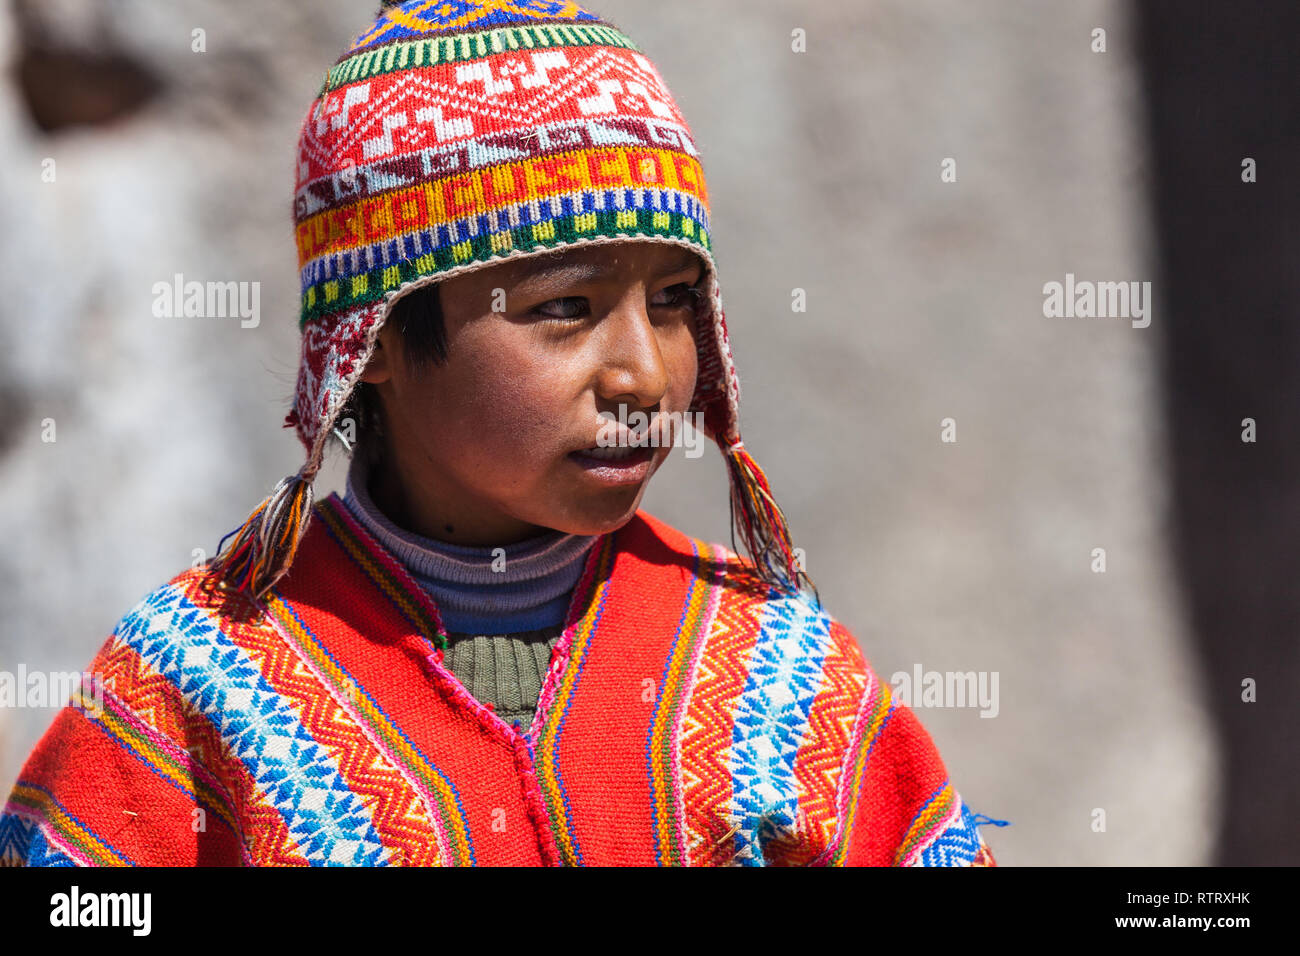 Cusco, Peru, July 2018: Child native to Cusco, with his typical cap and poncho, looks to the side while the photographer takes photos. Stock Photo